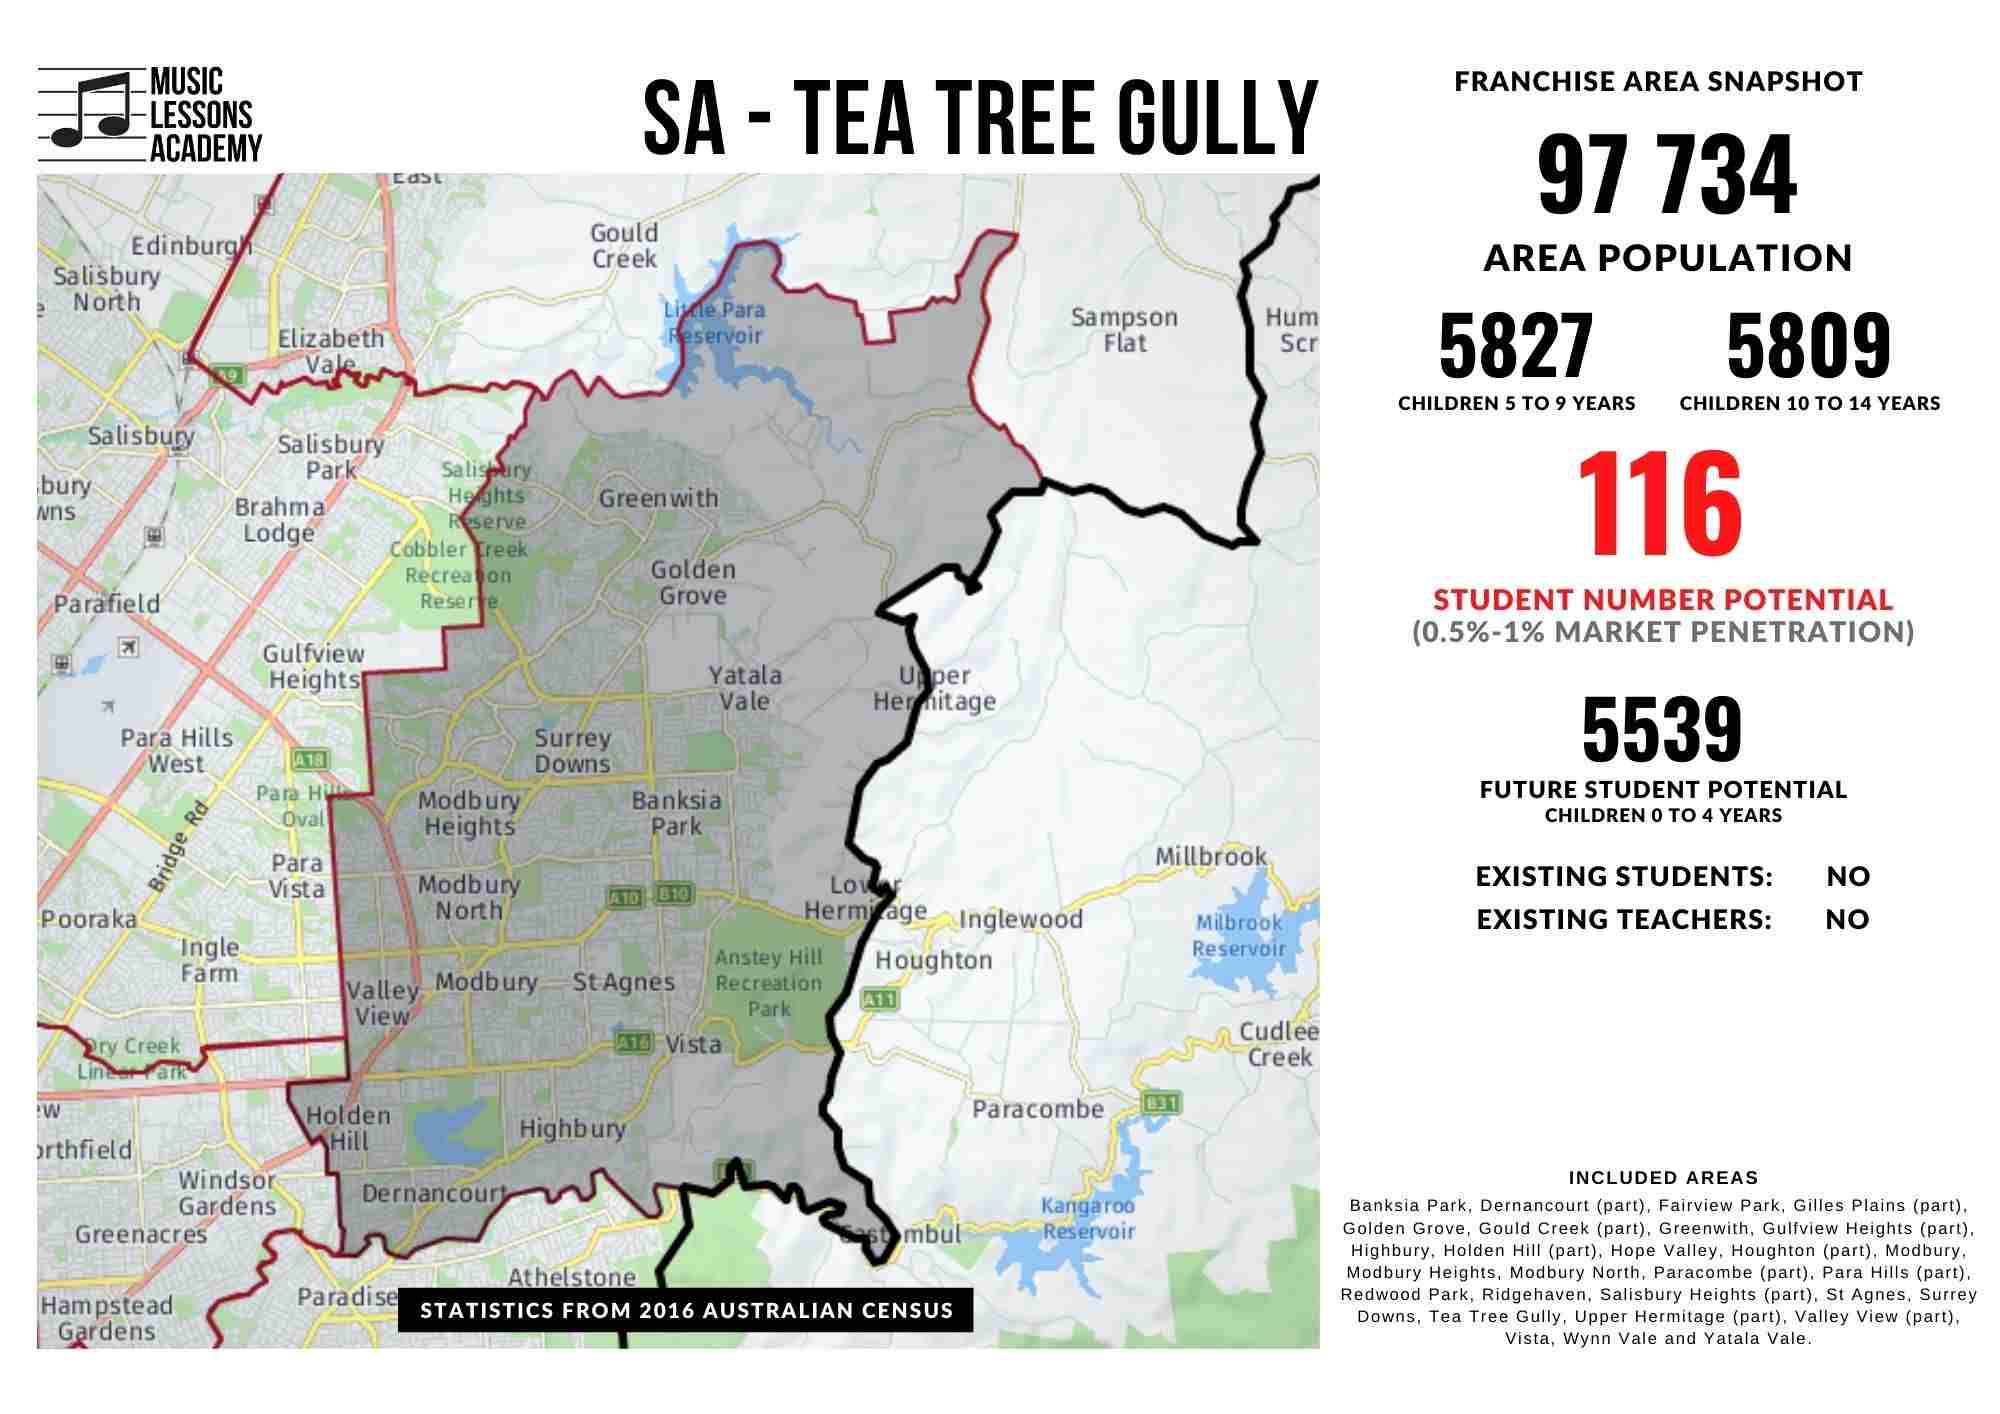 Tea Tree Gully Franchise for sale